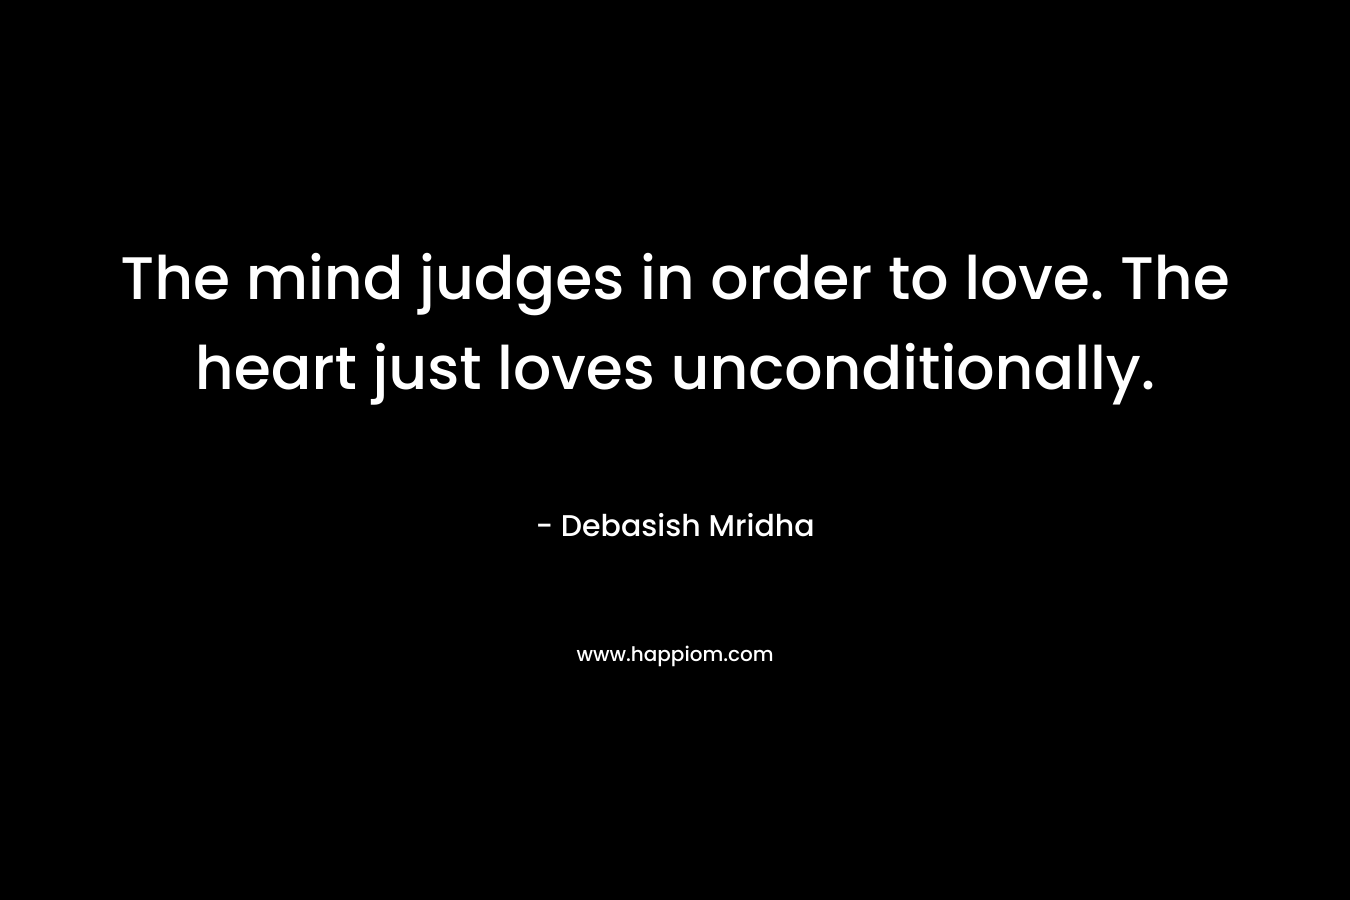 The mind judges in order to love. The heart just loves unconditionally.